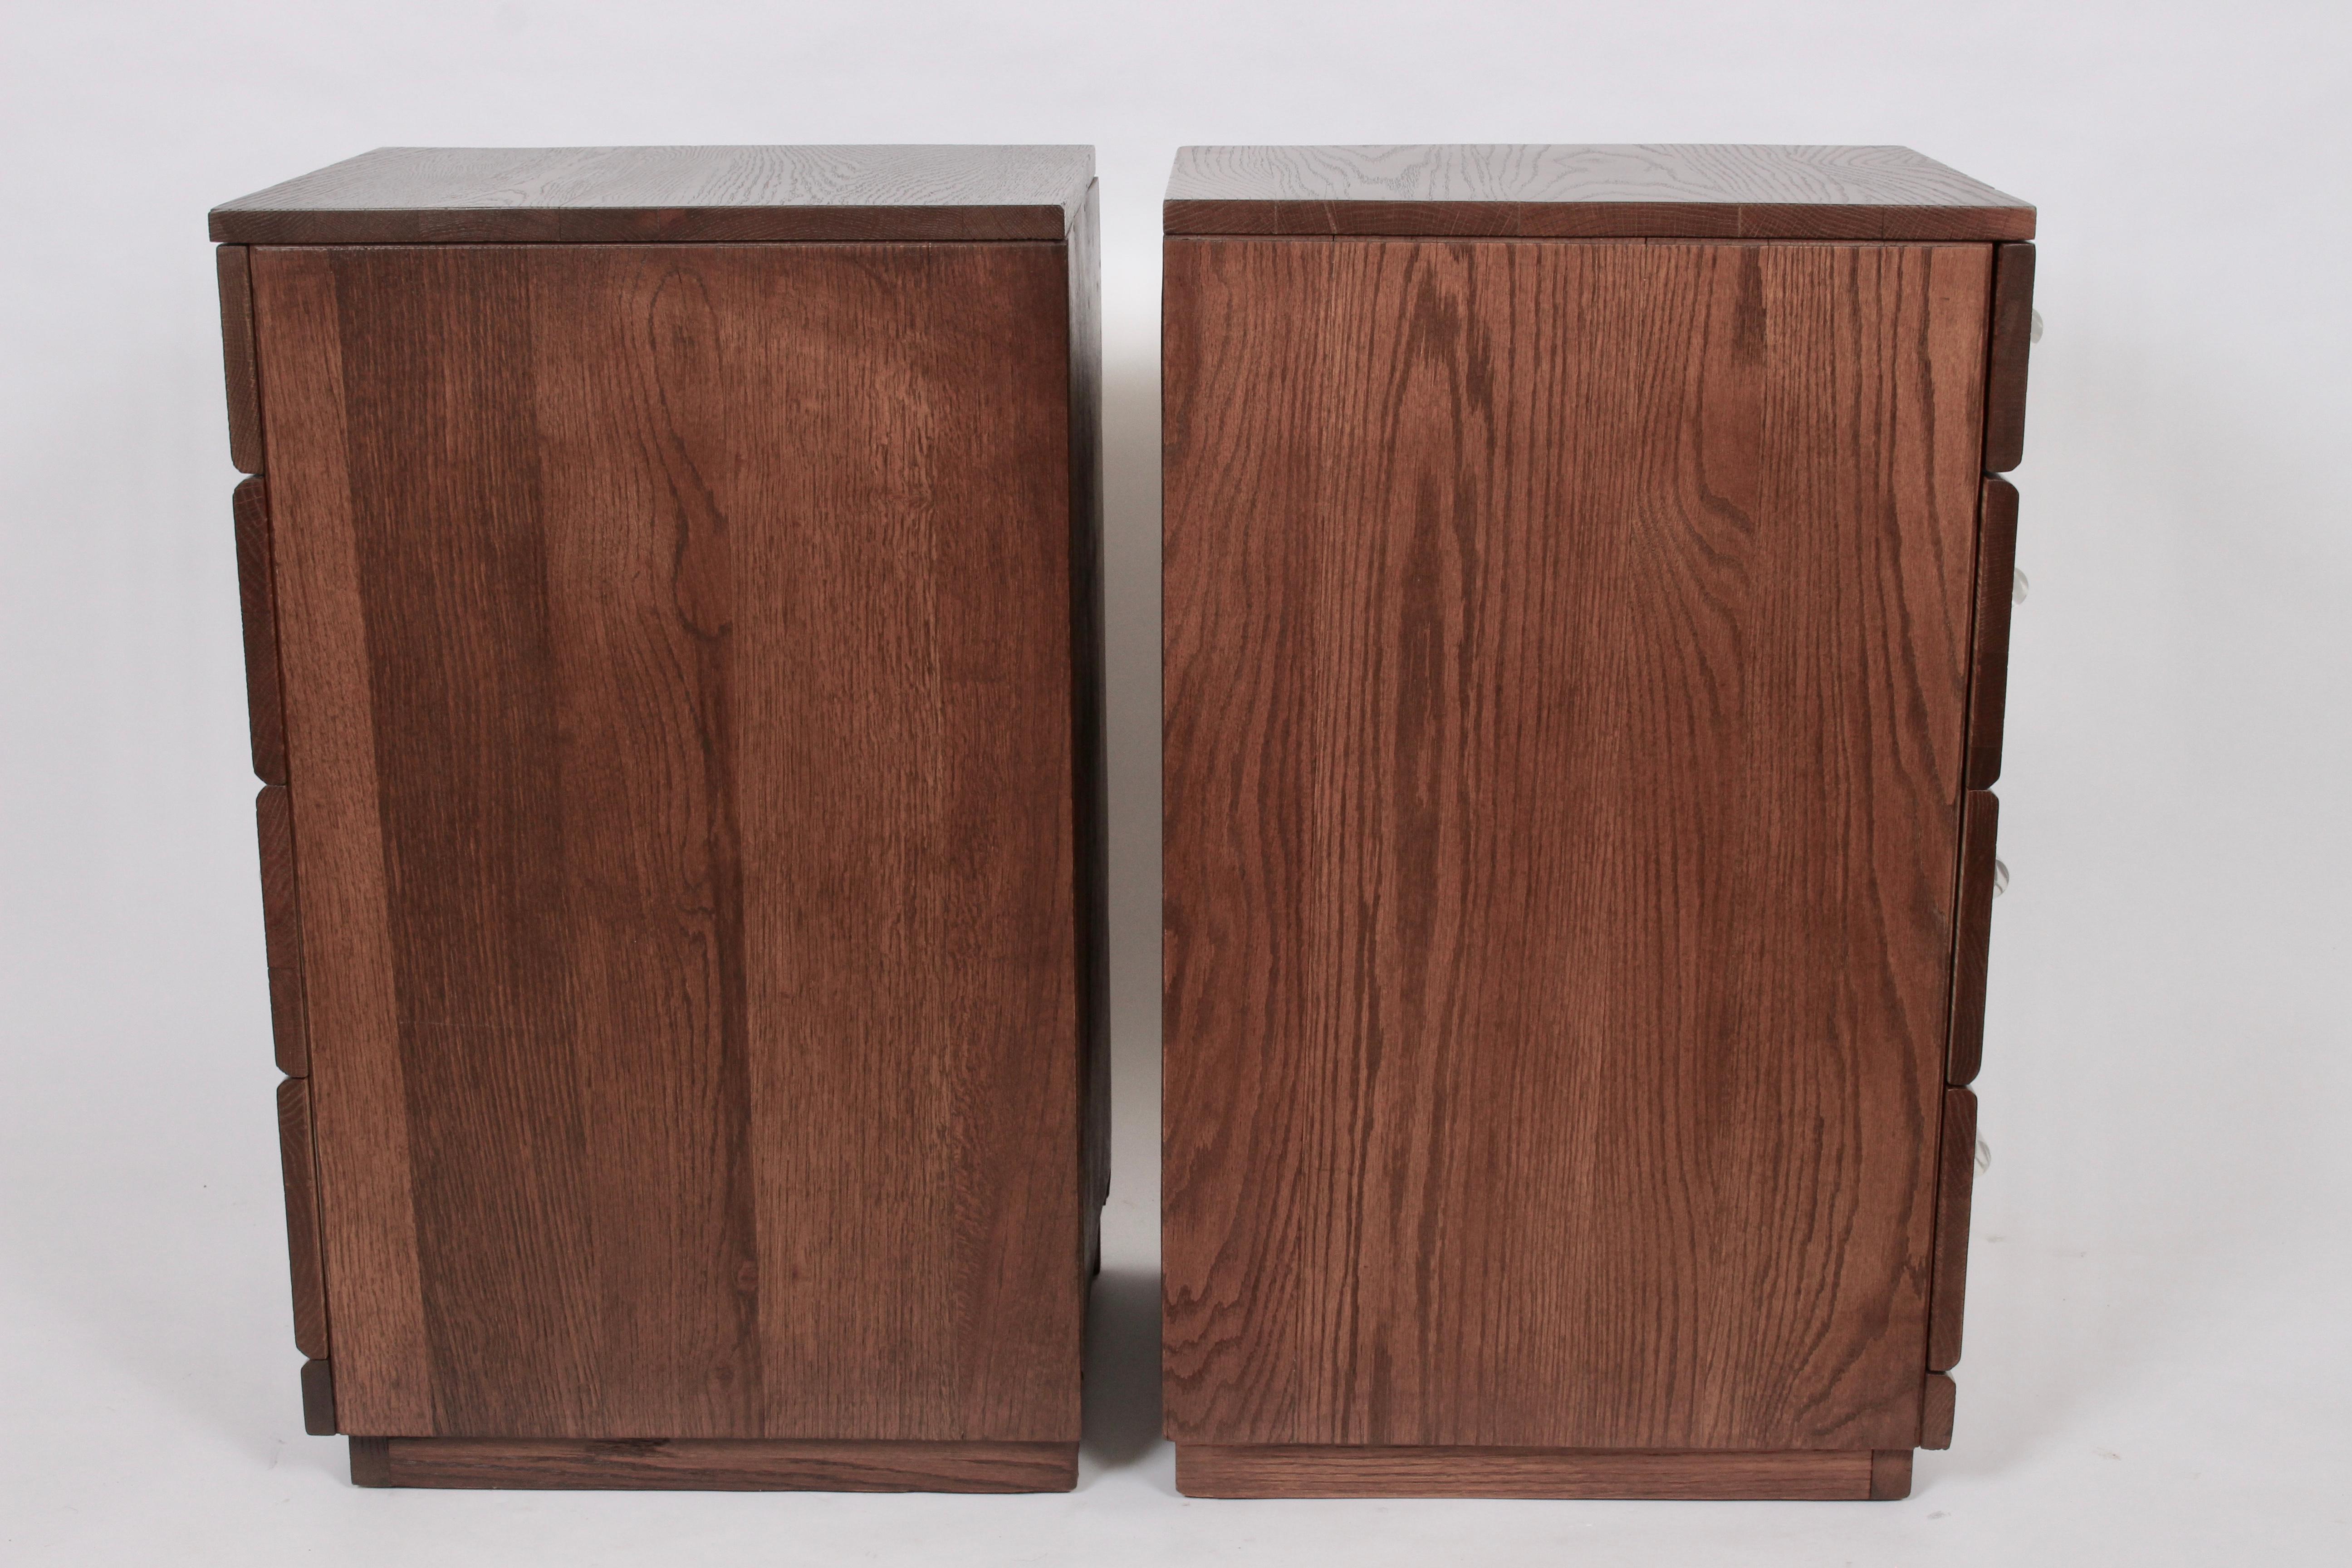 Pair of Raymond Loewy for Mengel 4 drawer stained oak higher bedside tables. Tall, rectangular form with custom Lucite pulls, Chestnut finish, sectional top drawers, fantastic storage. Mengel stamp to inside drawer. Kindly note, Professional